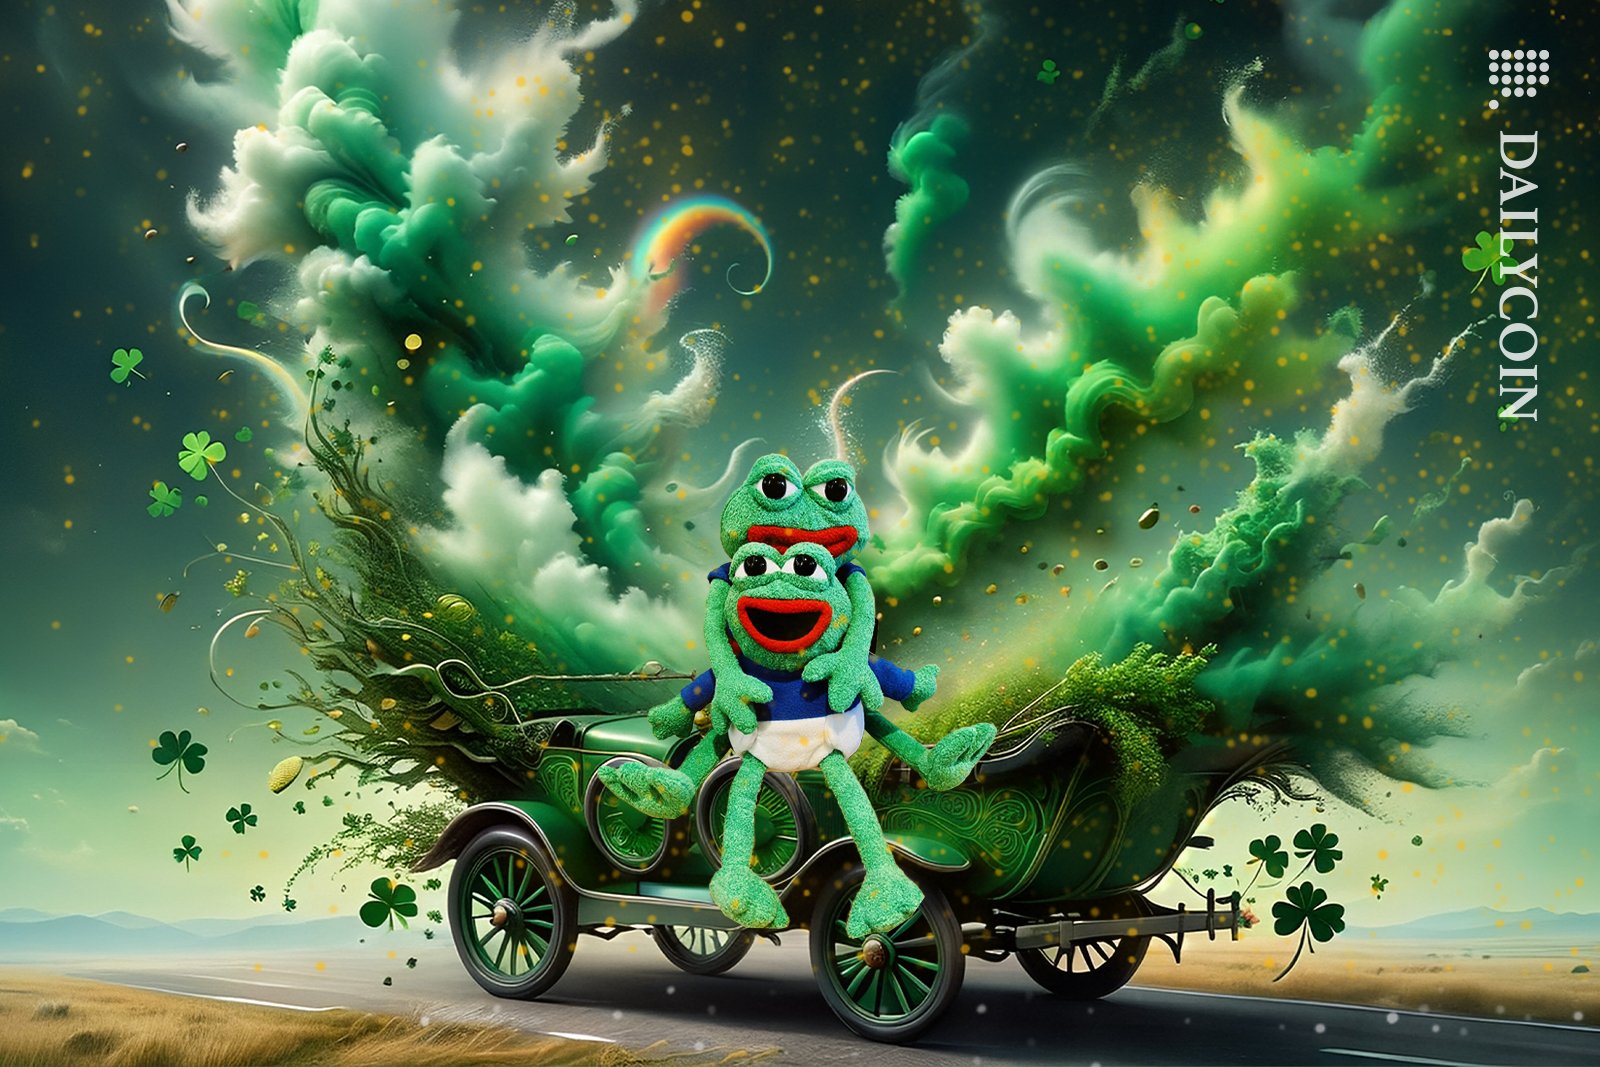 Pepe and his girlfriend enjoying a lucky charriot ride.